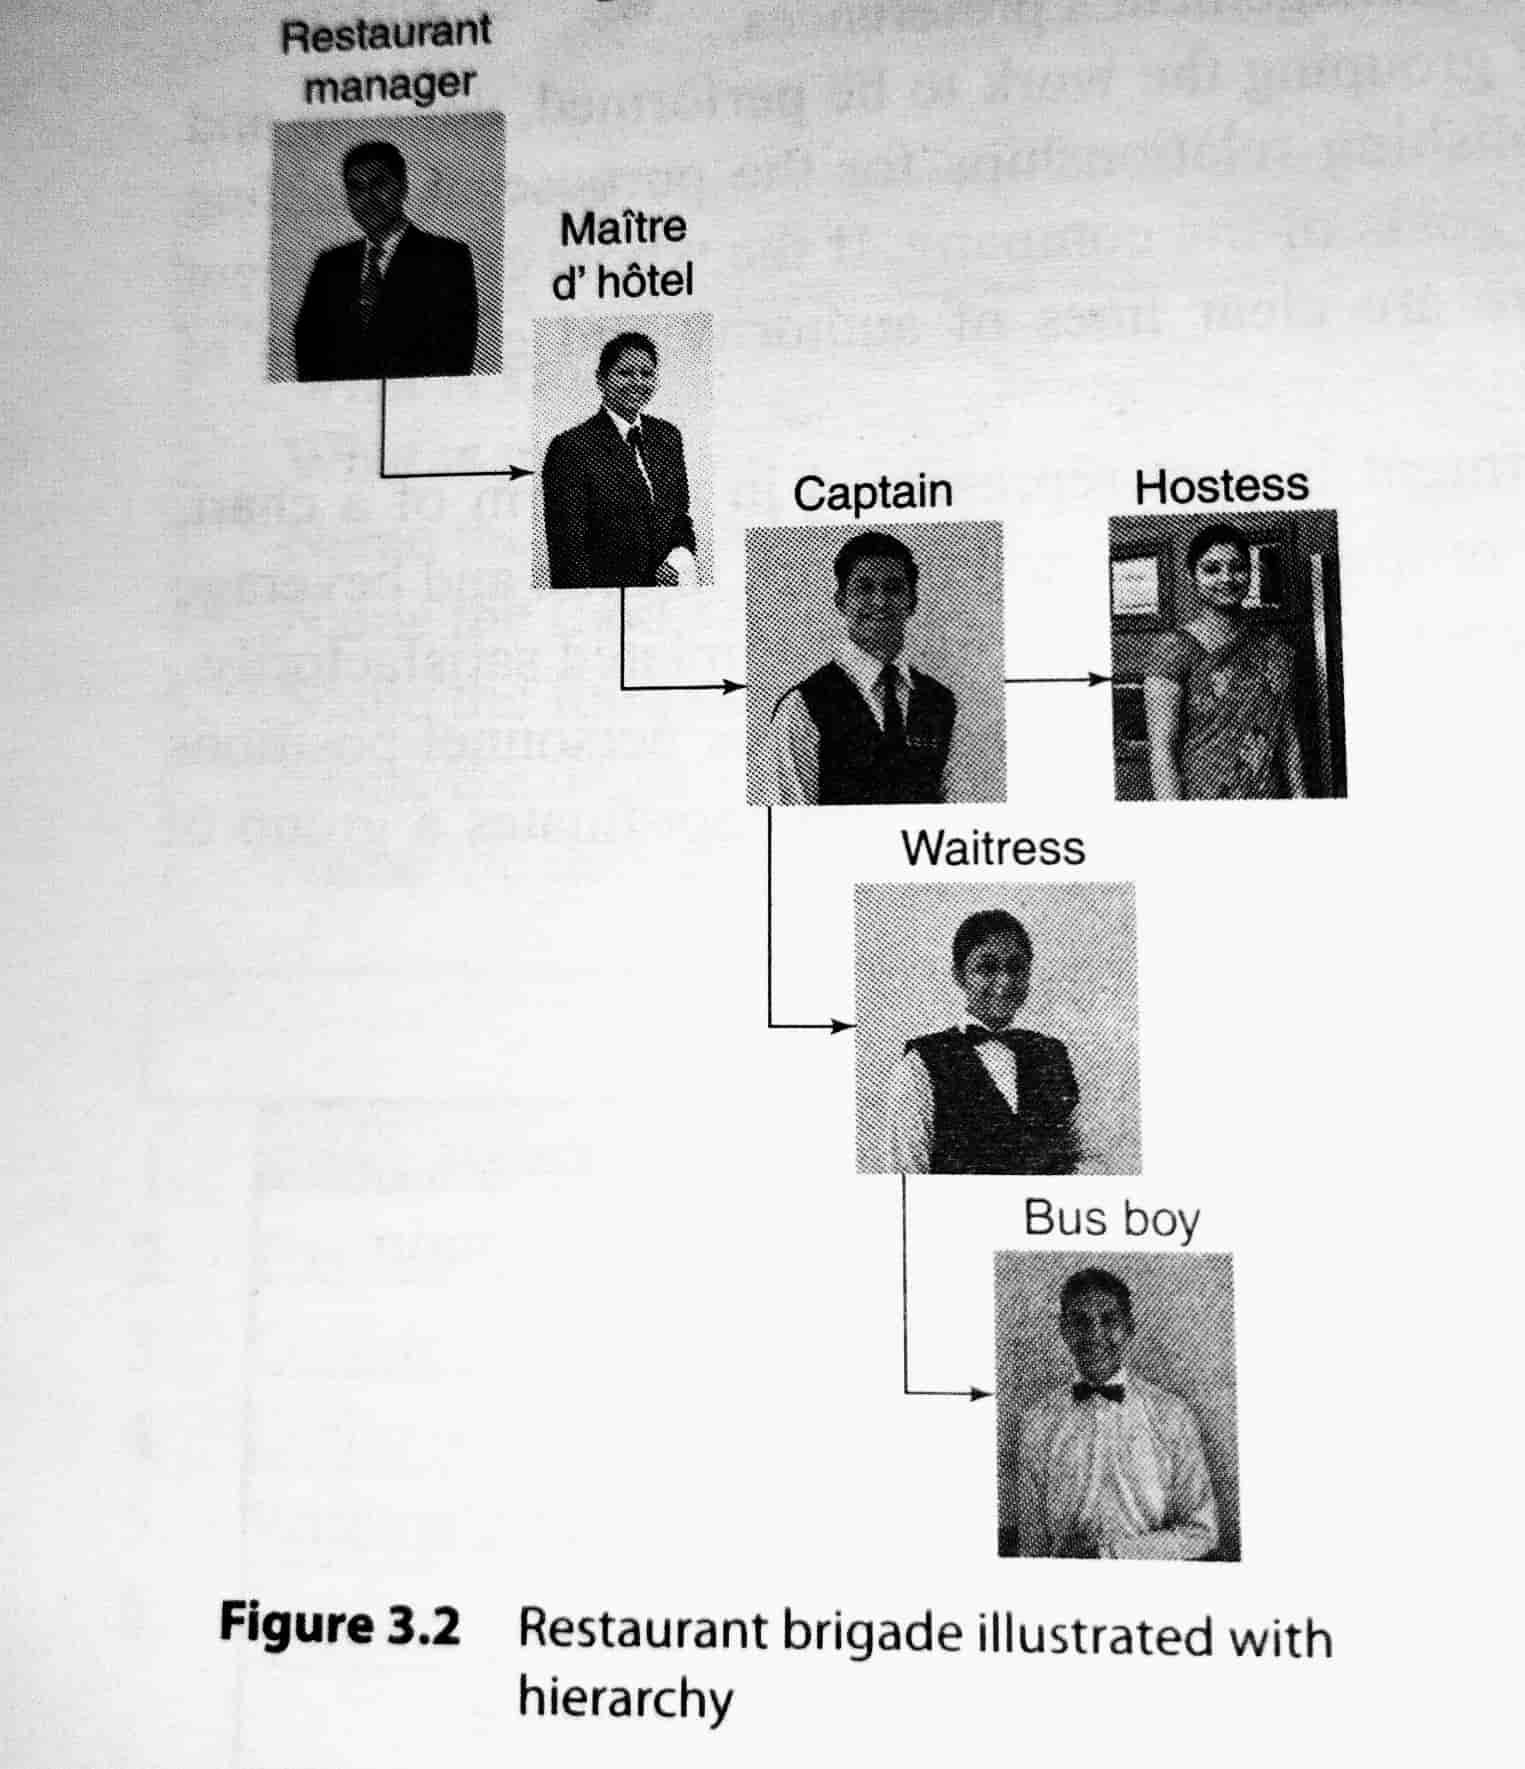 Restaurant brigade illustrated with hierarchy